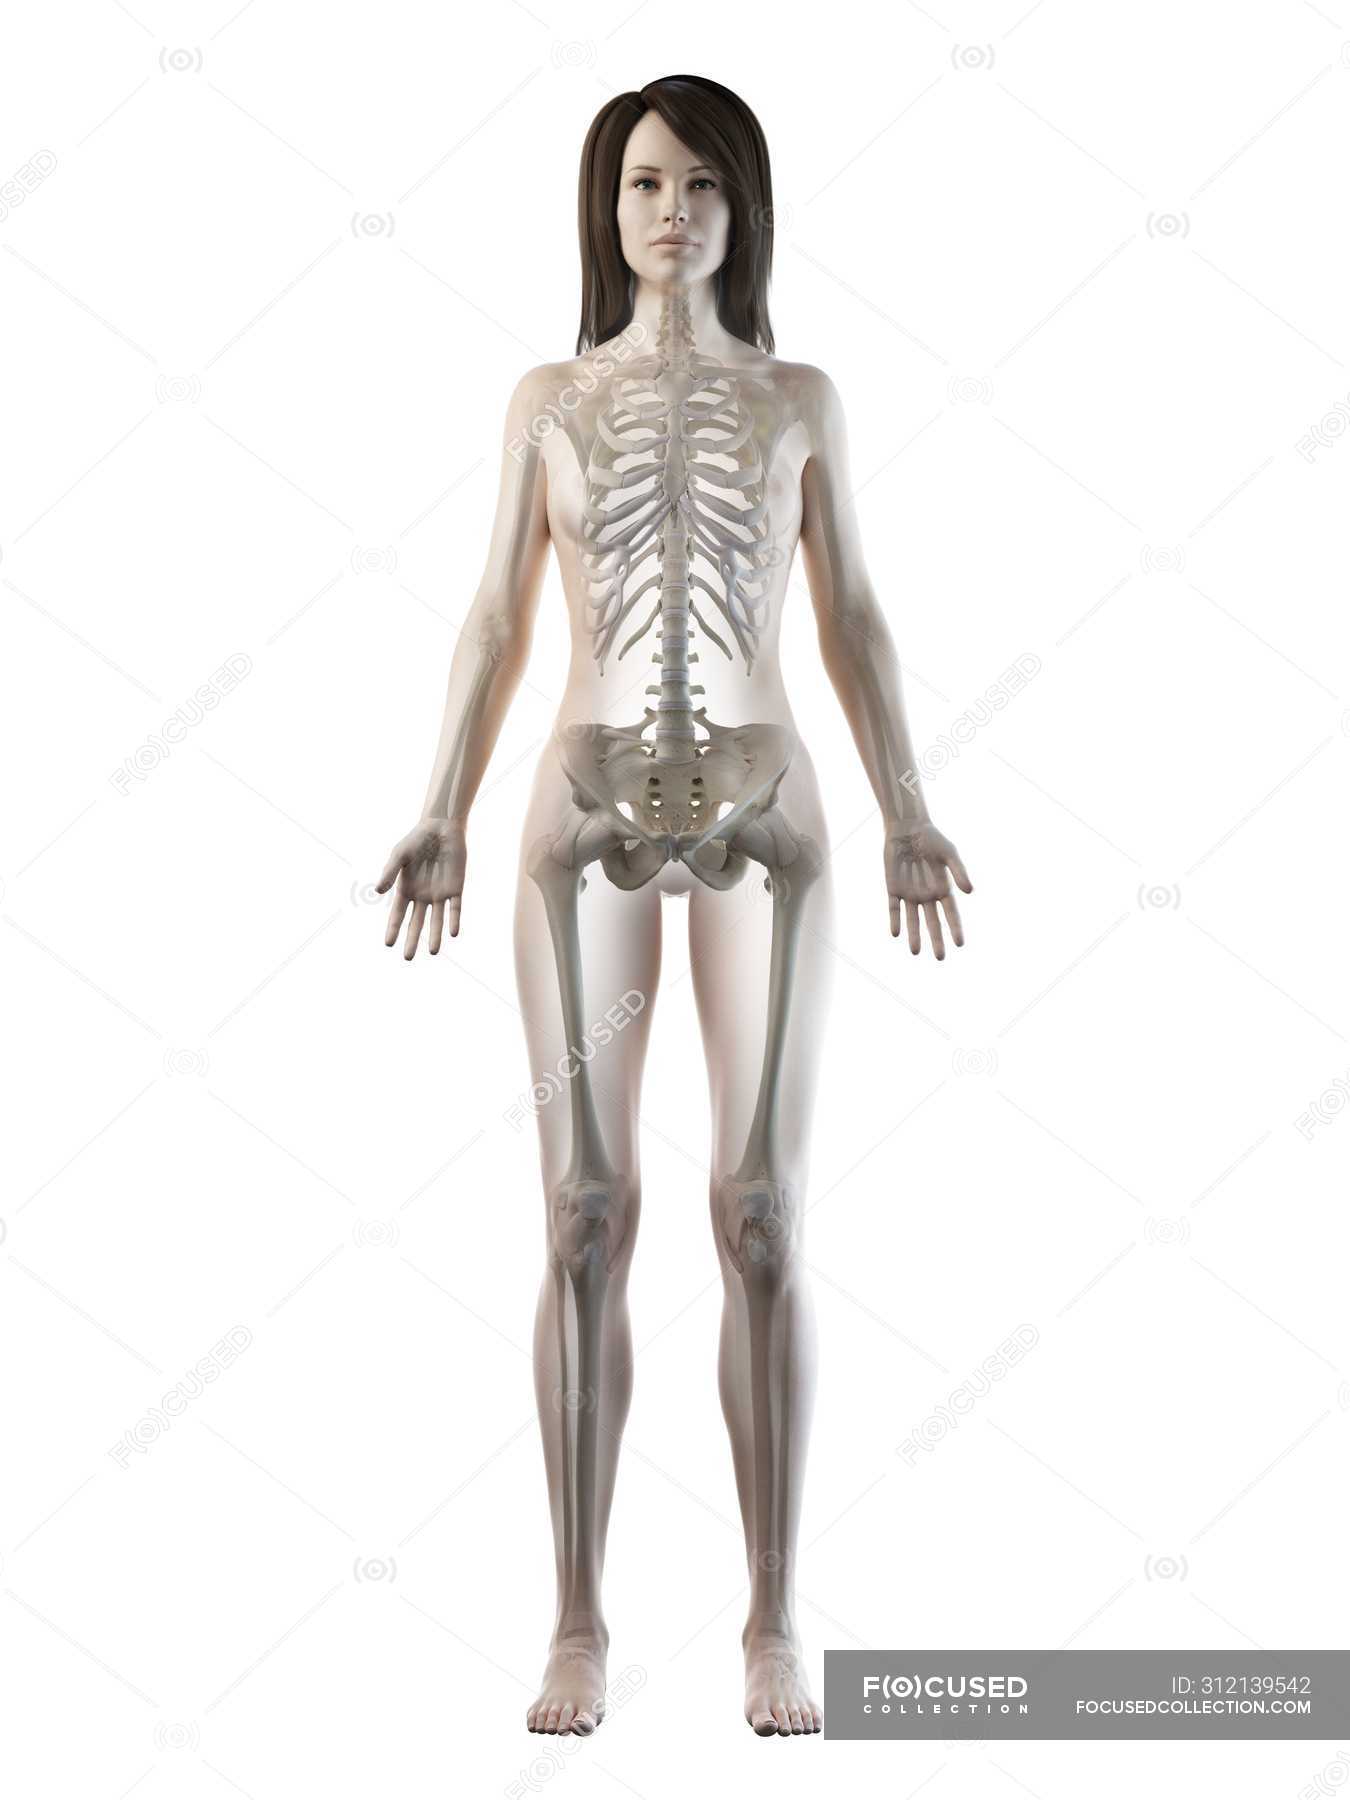 Visible skeleton in female body silhouette in front view, computer